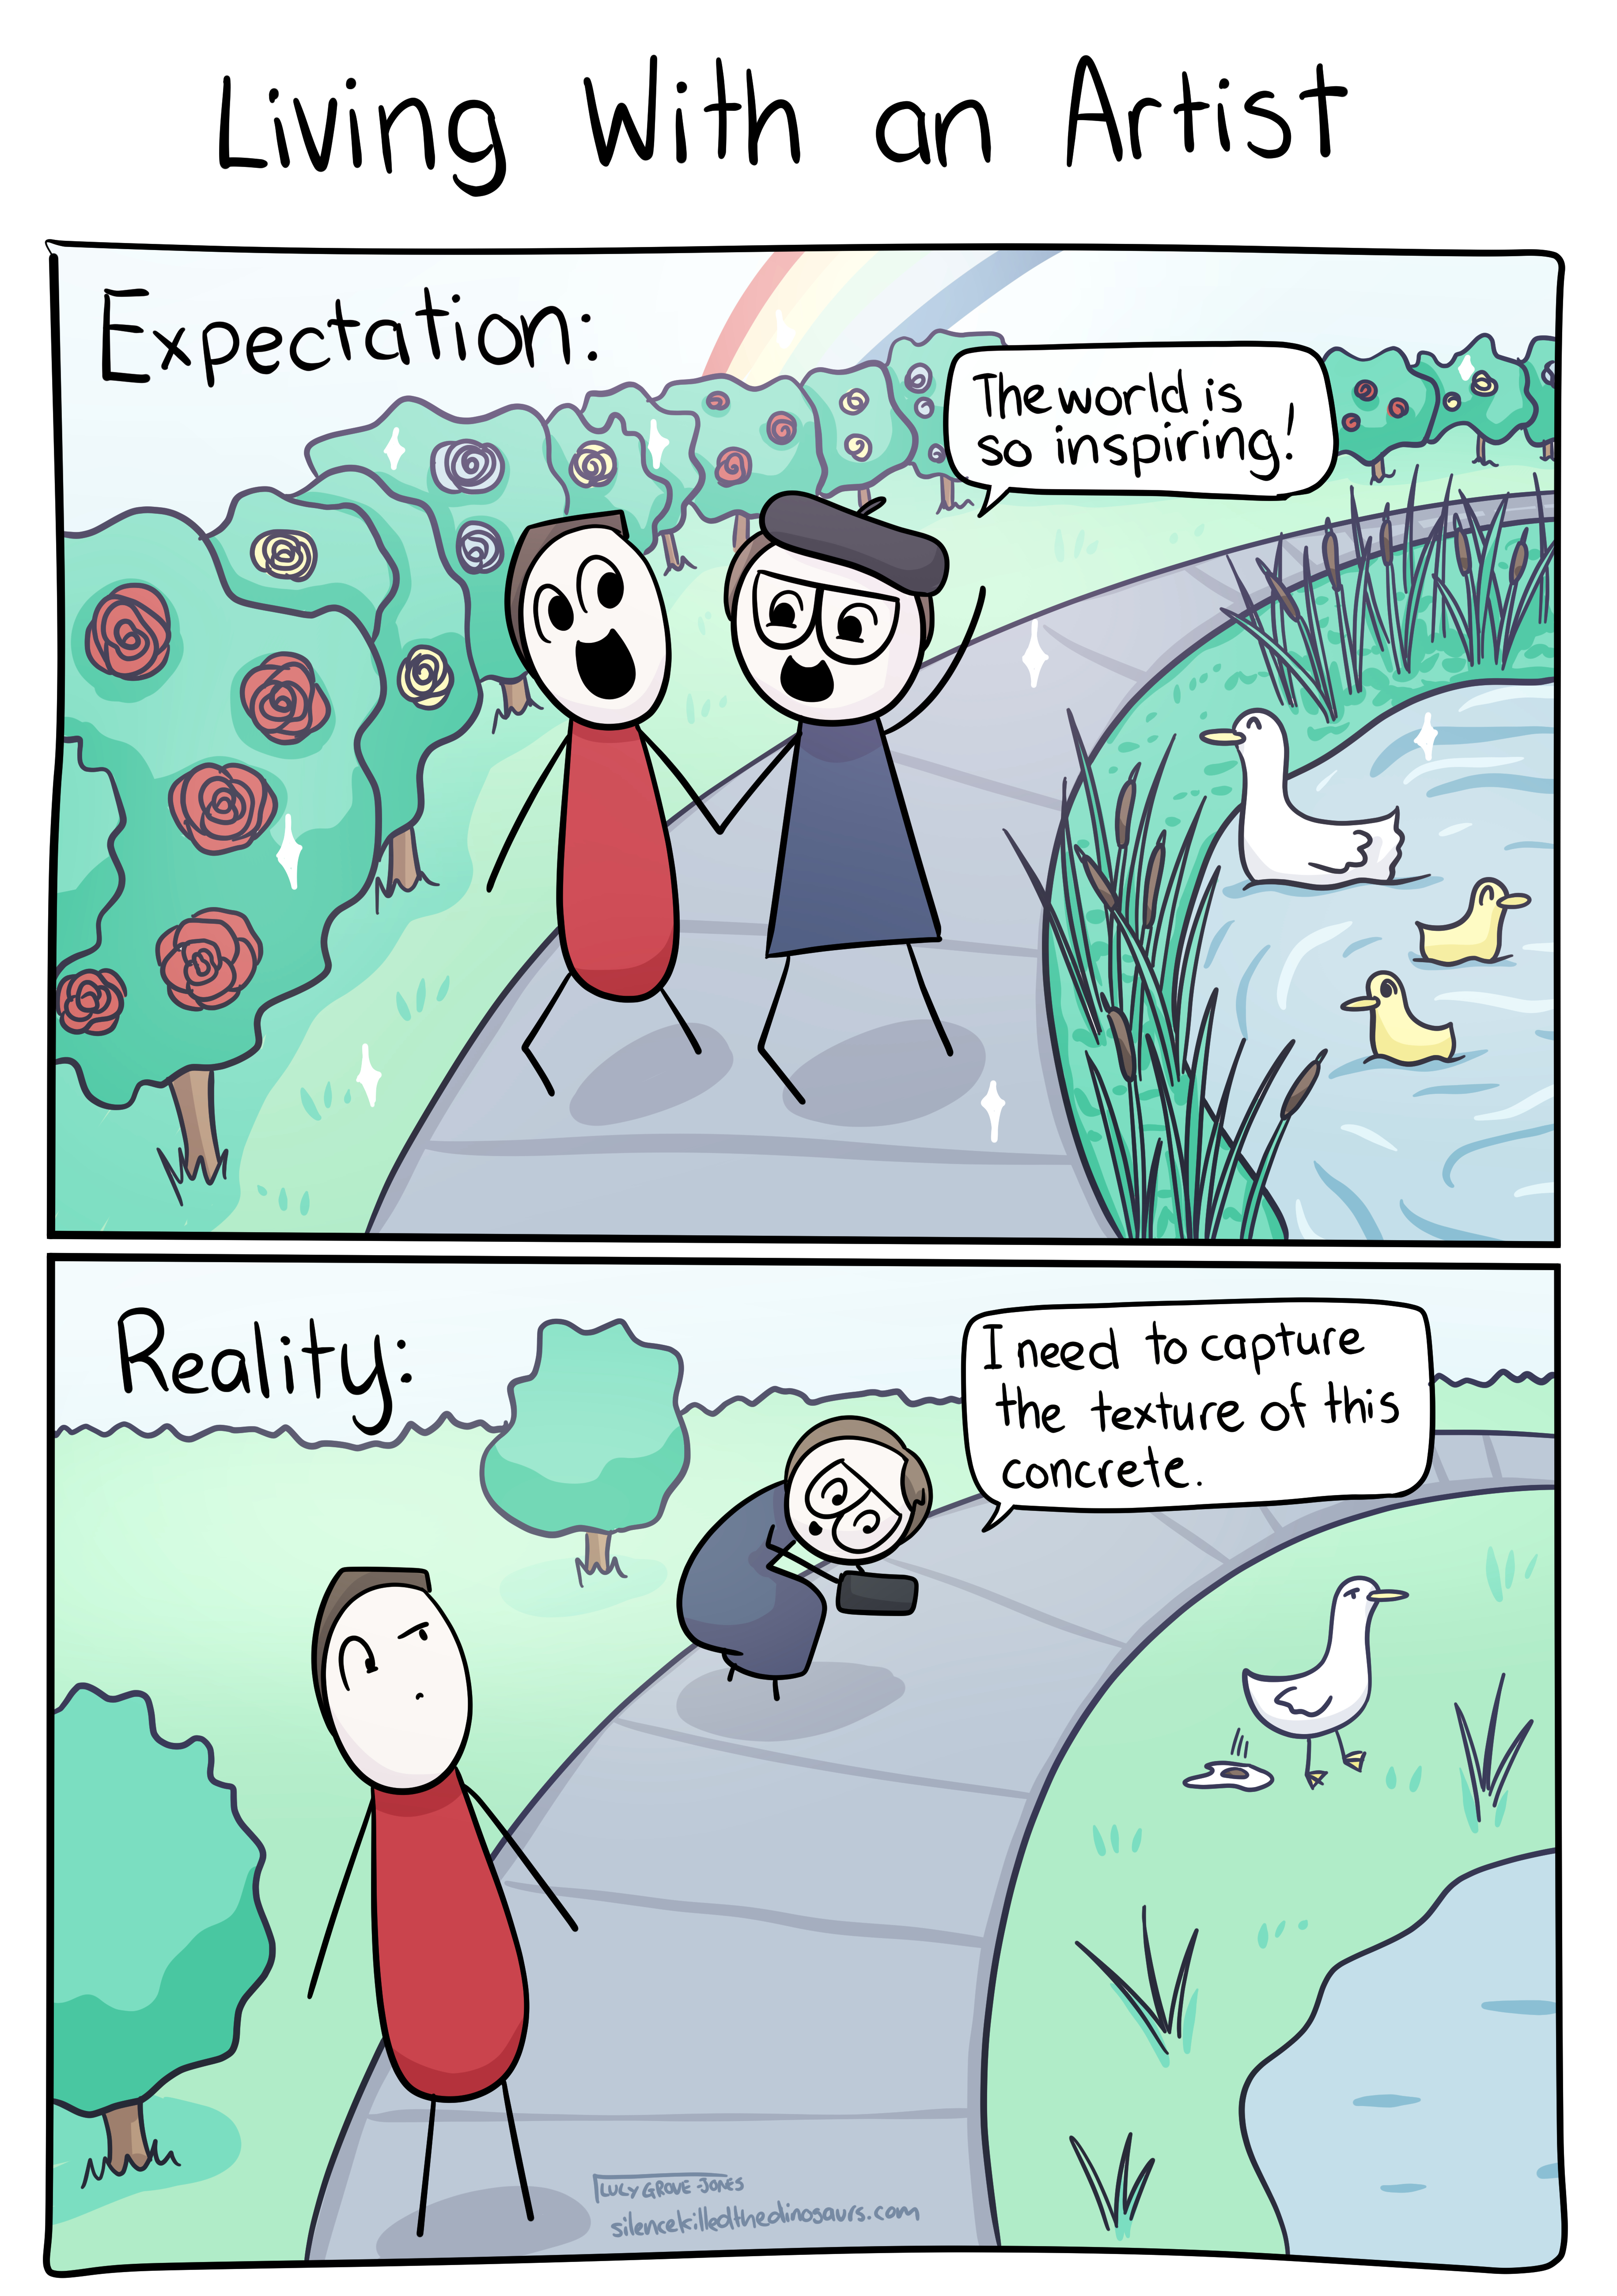 Comic. Expectation: comic lucy and her partner are walking down a lovely path by a duck pond with flowers on one side and reeds on the other as comic lucy says 'the world is so inspiring!'. Reality: lucy's partner is walking down a mediocre path with some scraggly bushes and a bleh duck pond near a duck doing a poo, while comic lucy crouches in the distance with her phone out saying 'I need to capture the texture of this concrete'